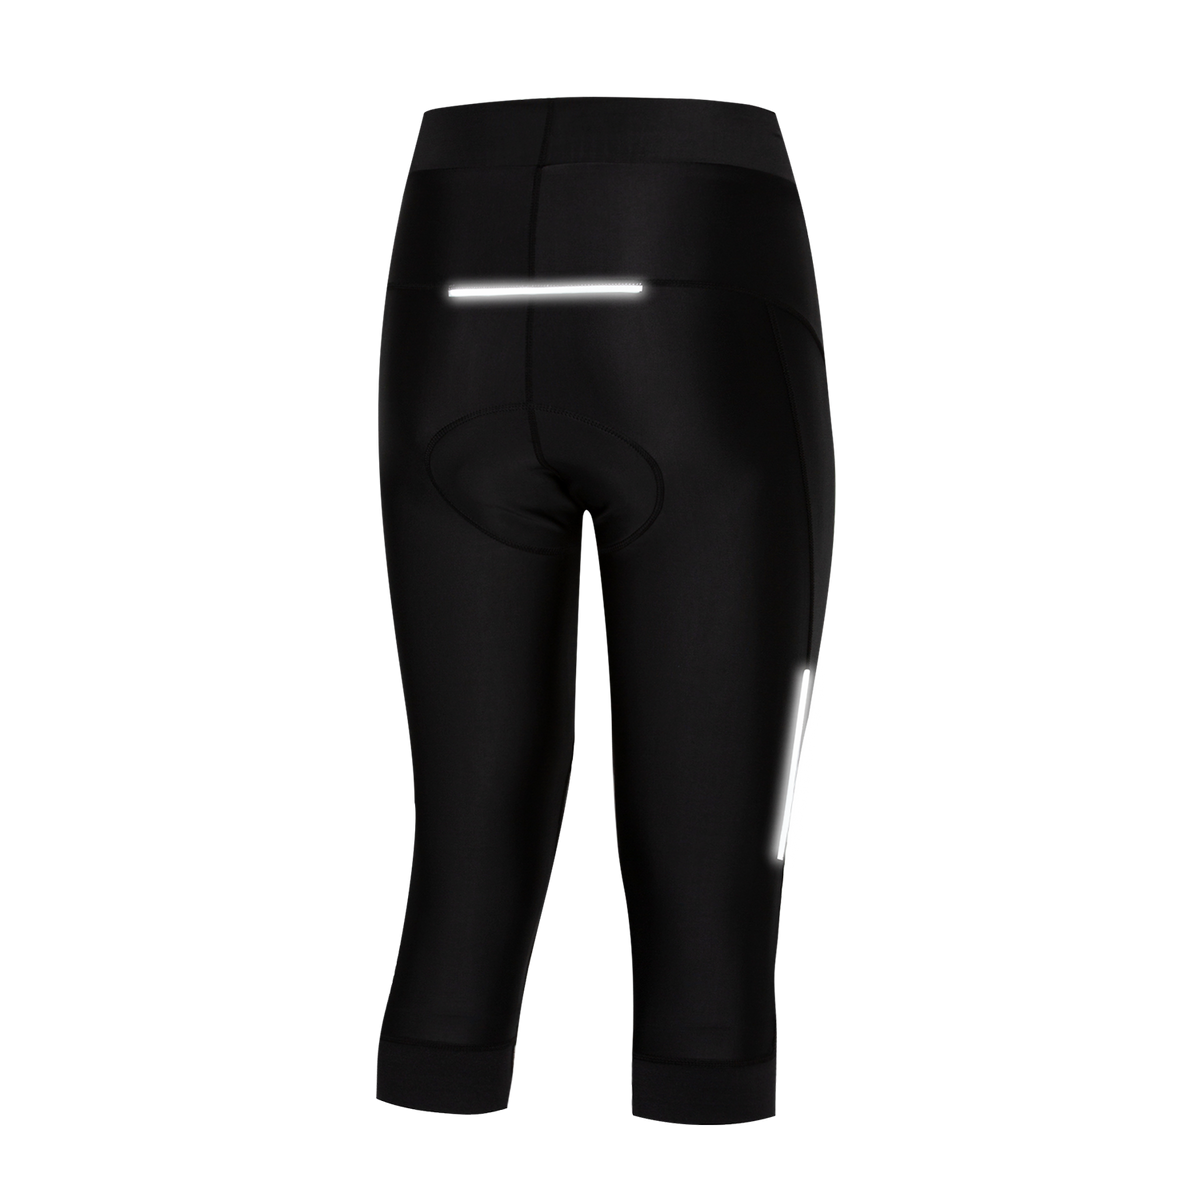 Women's 3/4 Cycling Tights